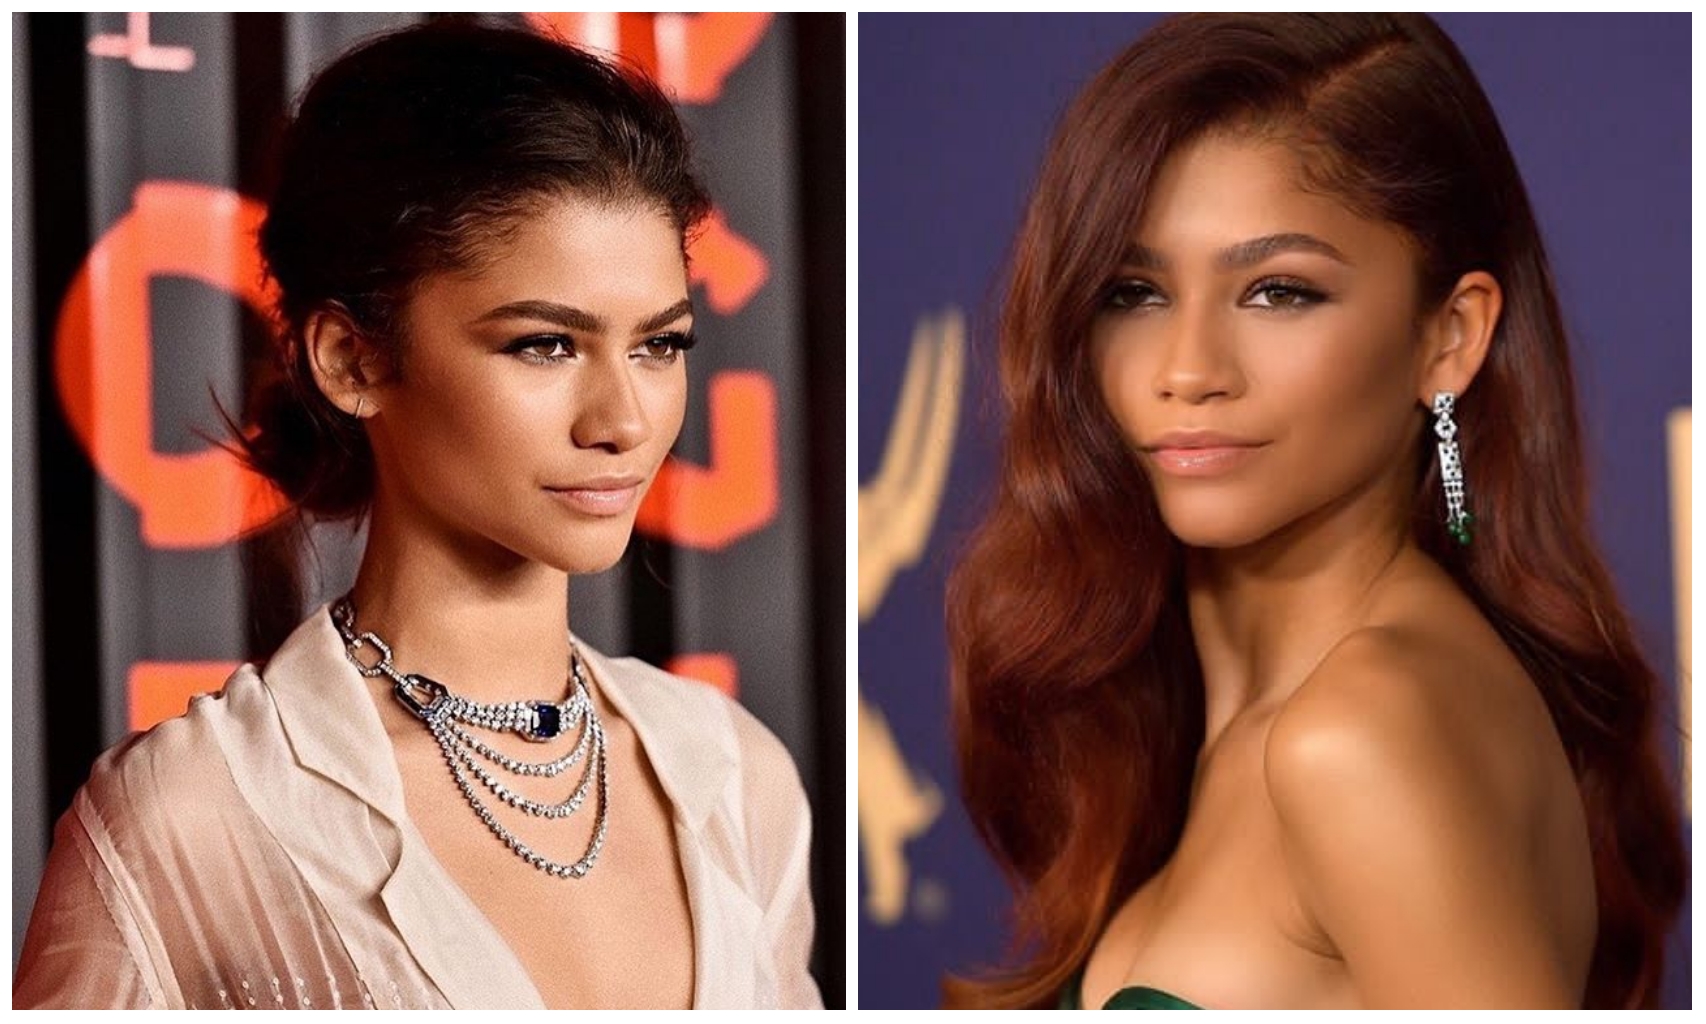 #Emmy: Zendaya wins Outstanding Lead Actress in a Drama Series, becomes youngest actress to win the award (Video)